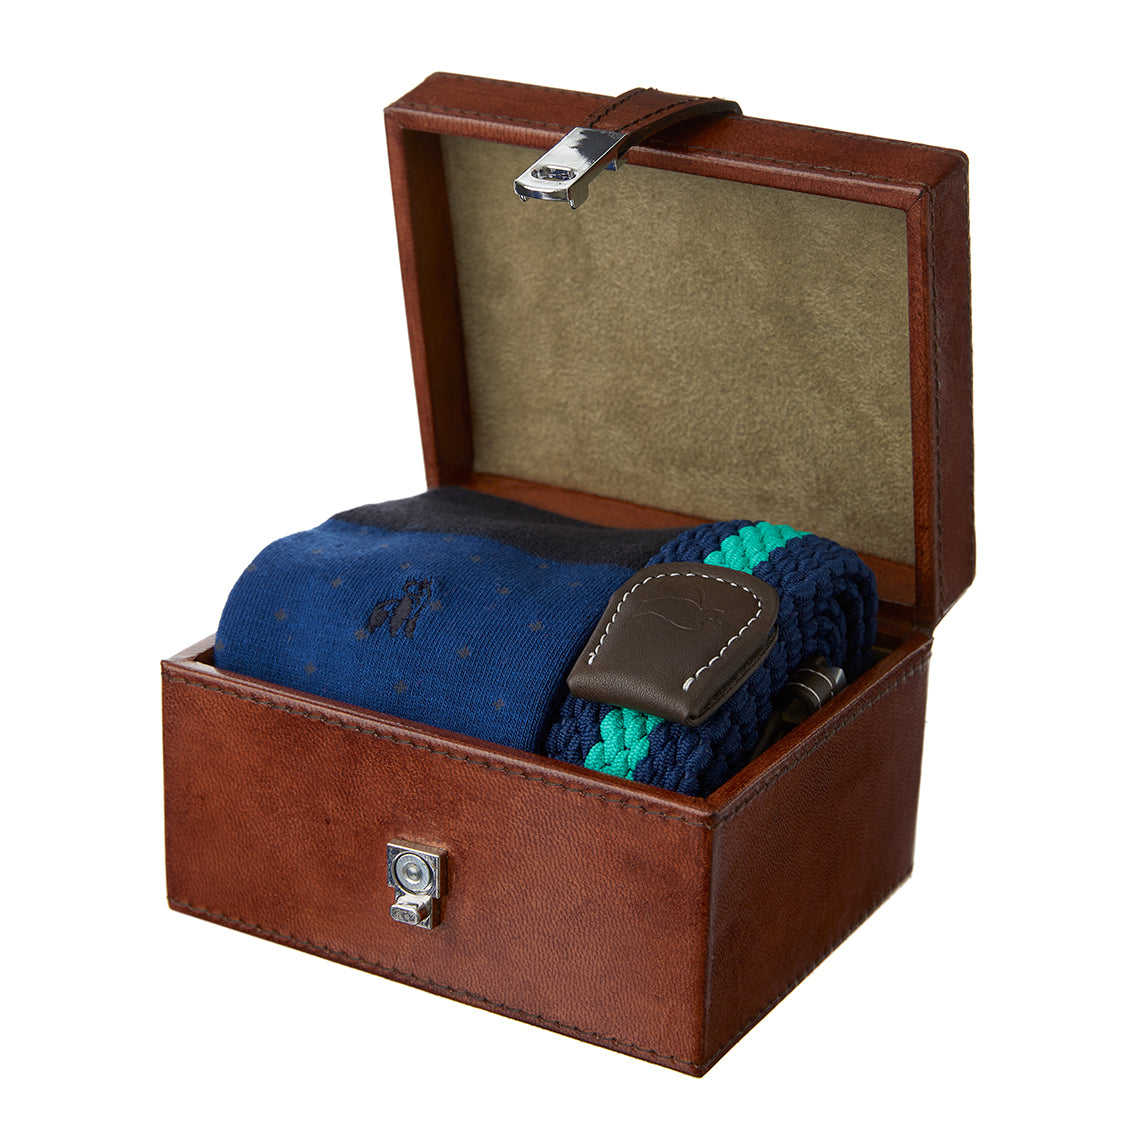 Socks & Belt in a box spotted navy with blue and green stripe belt